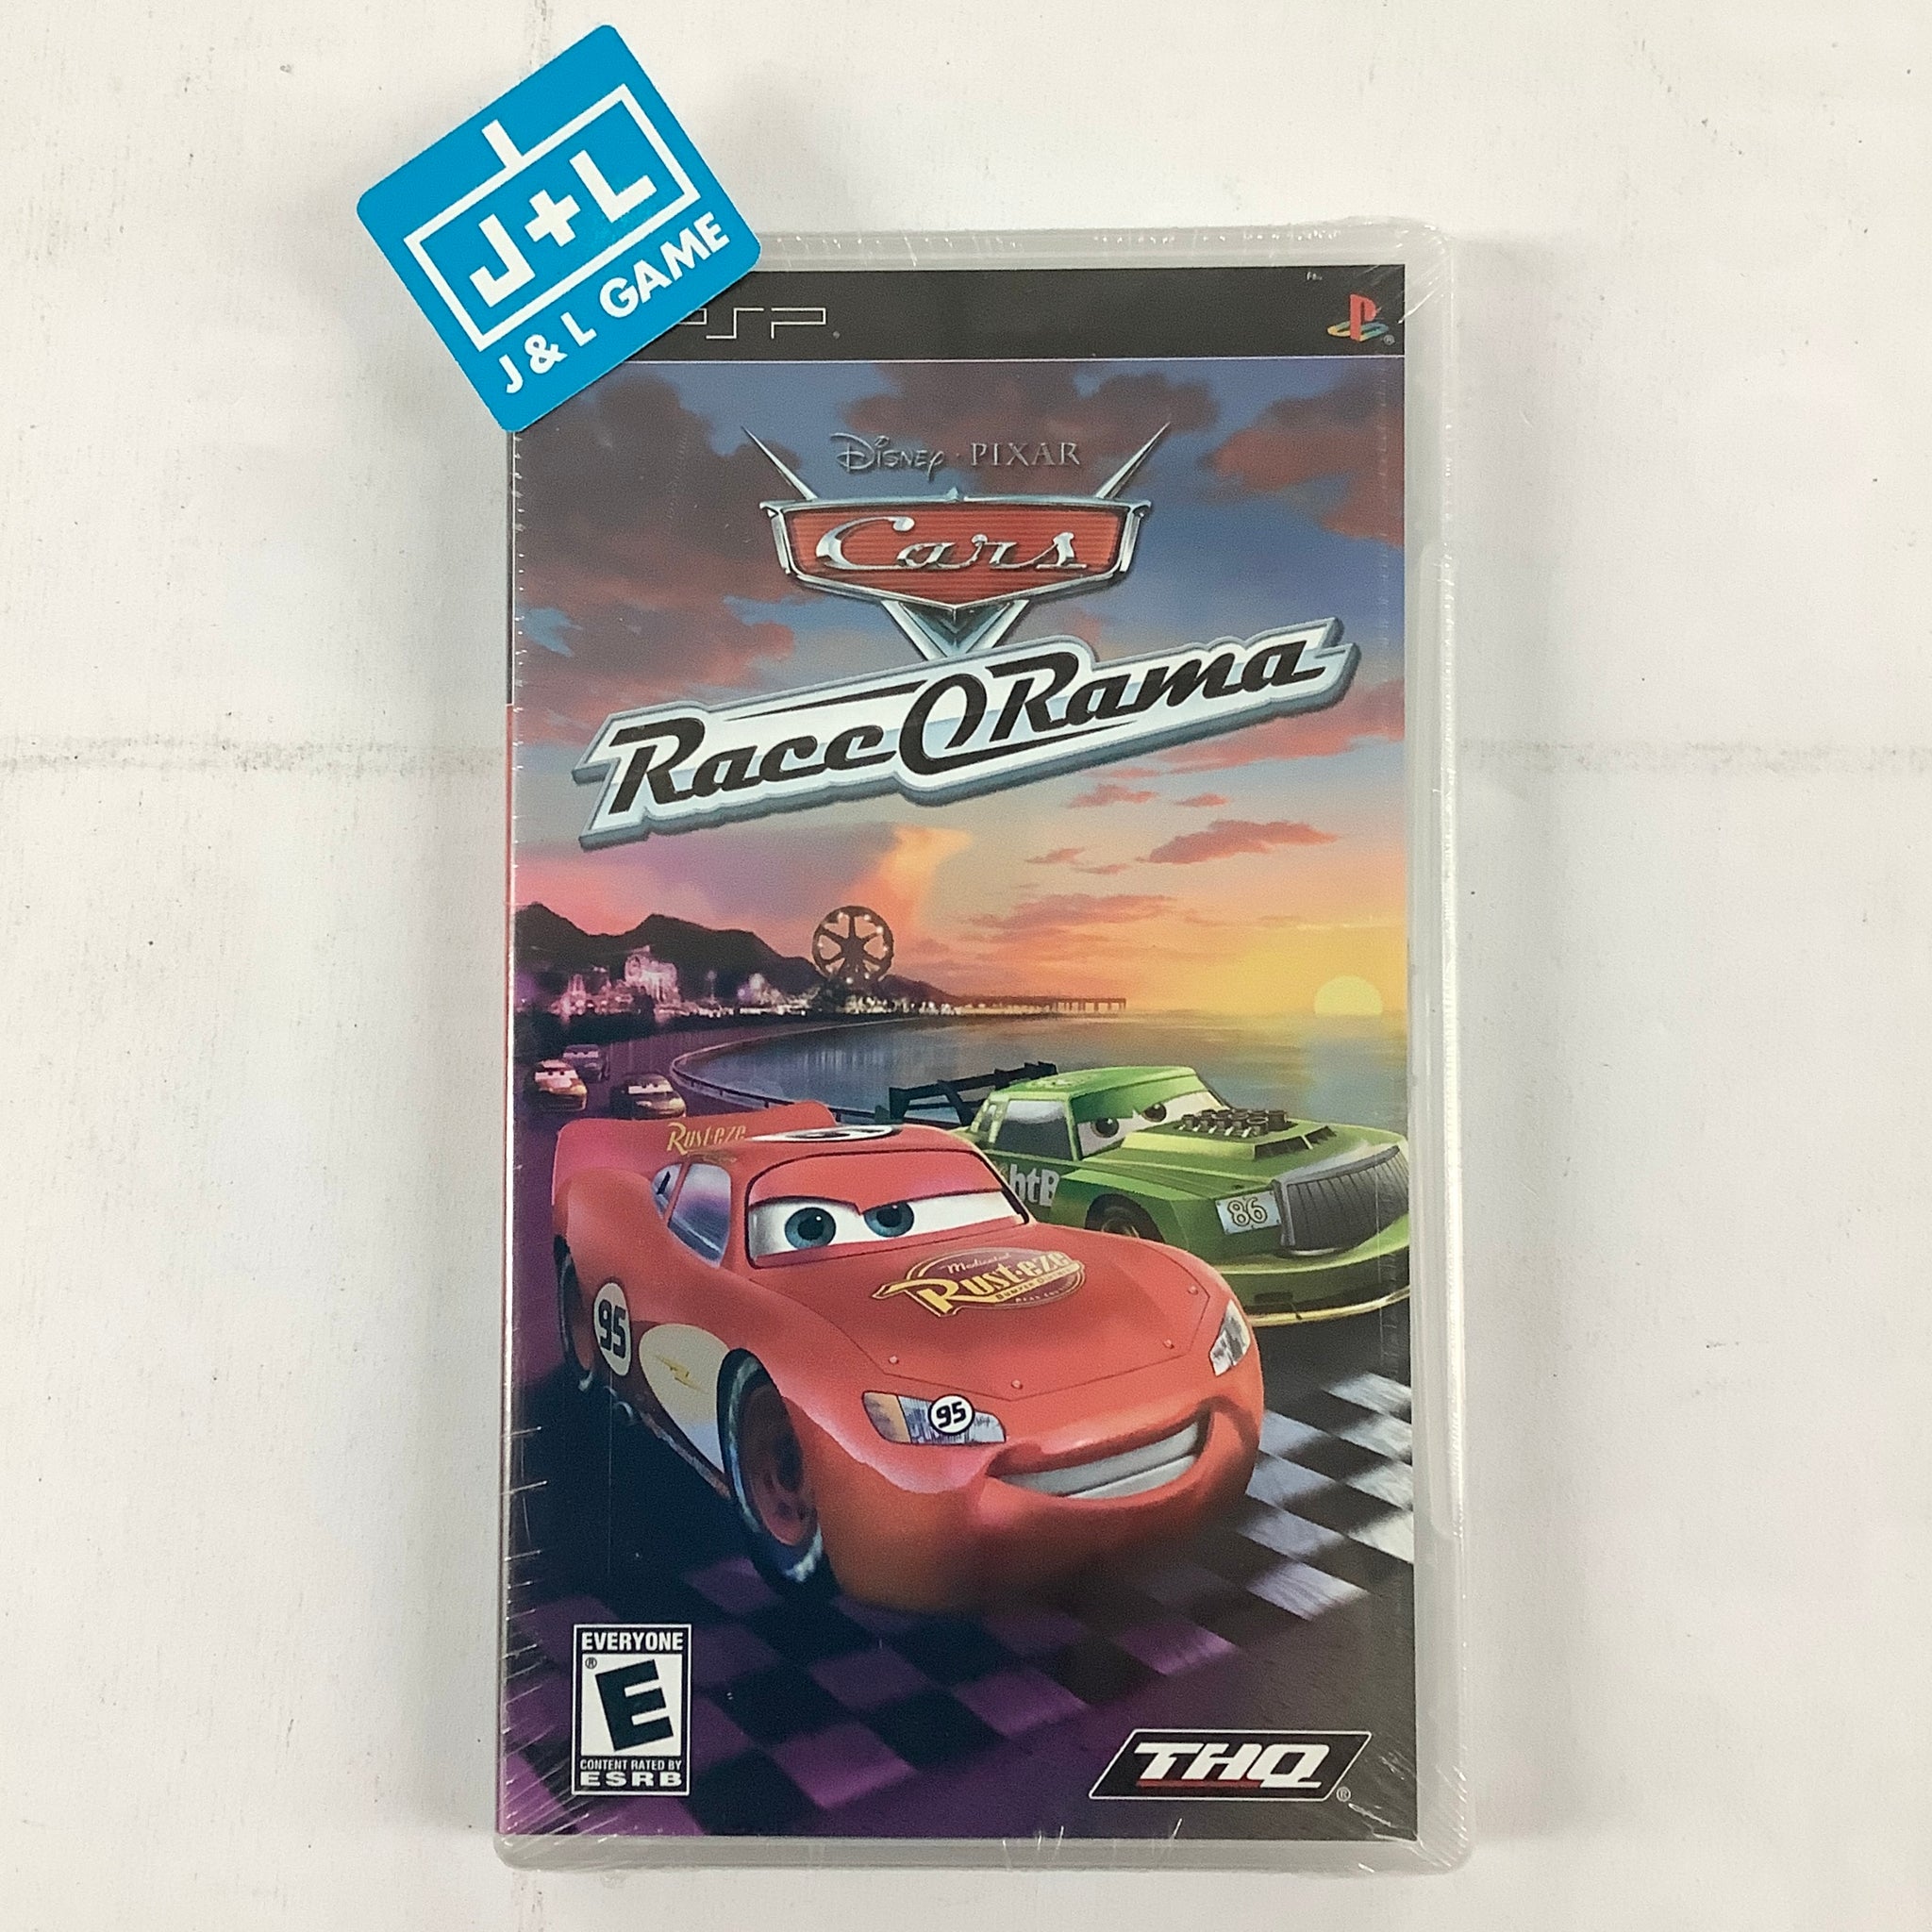 Nintendo DS Cars Race-O-Rama Rating E-Everyone Video Games for sale